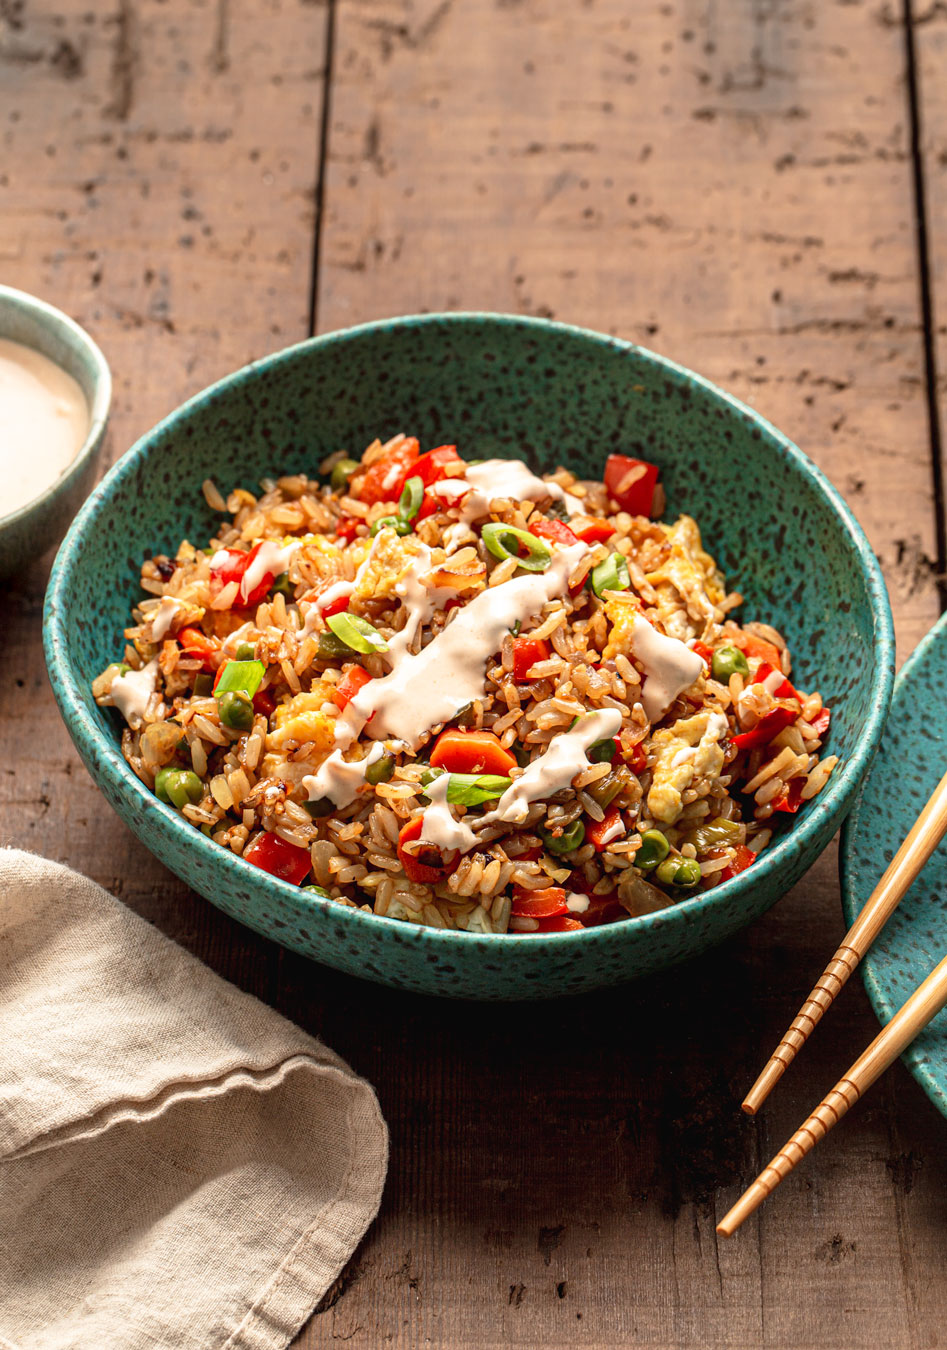 Healthy Vegetable Fried Rice with Yum Yum Sauce